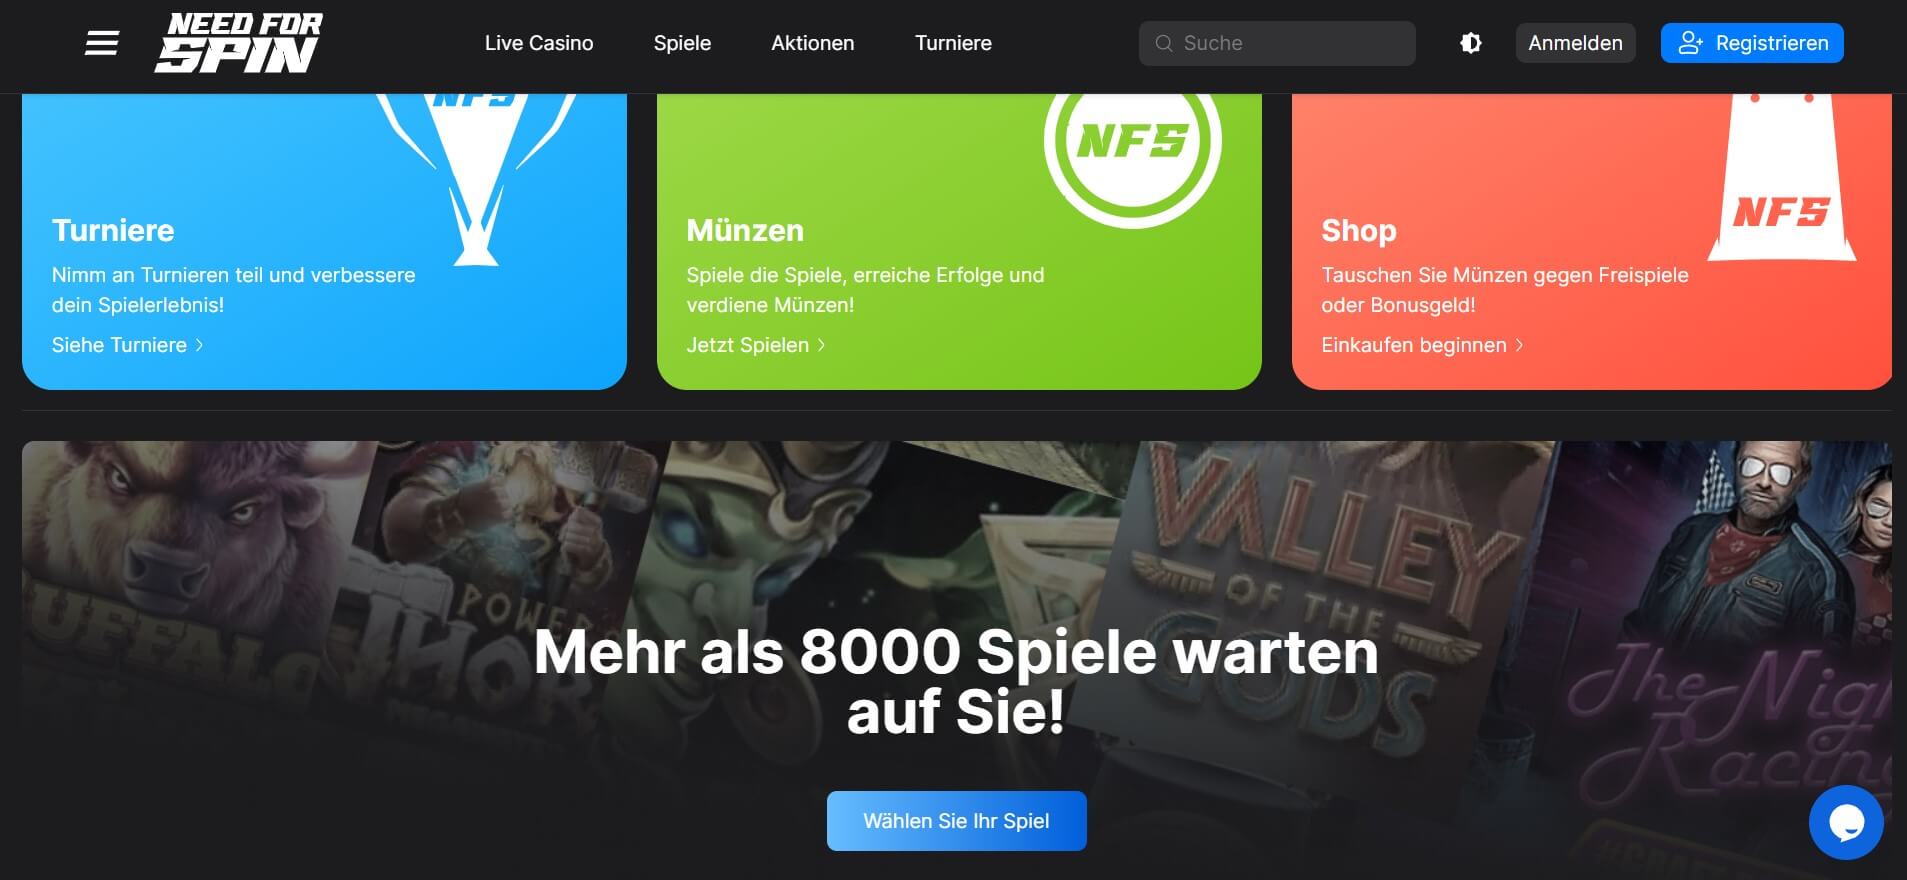 Need-for-Spin-Spiele